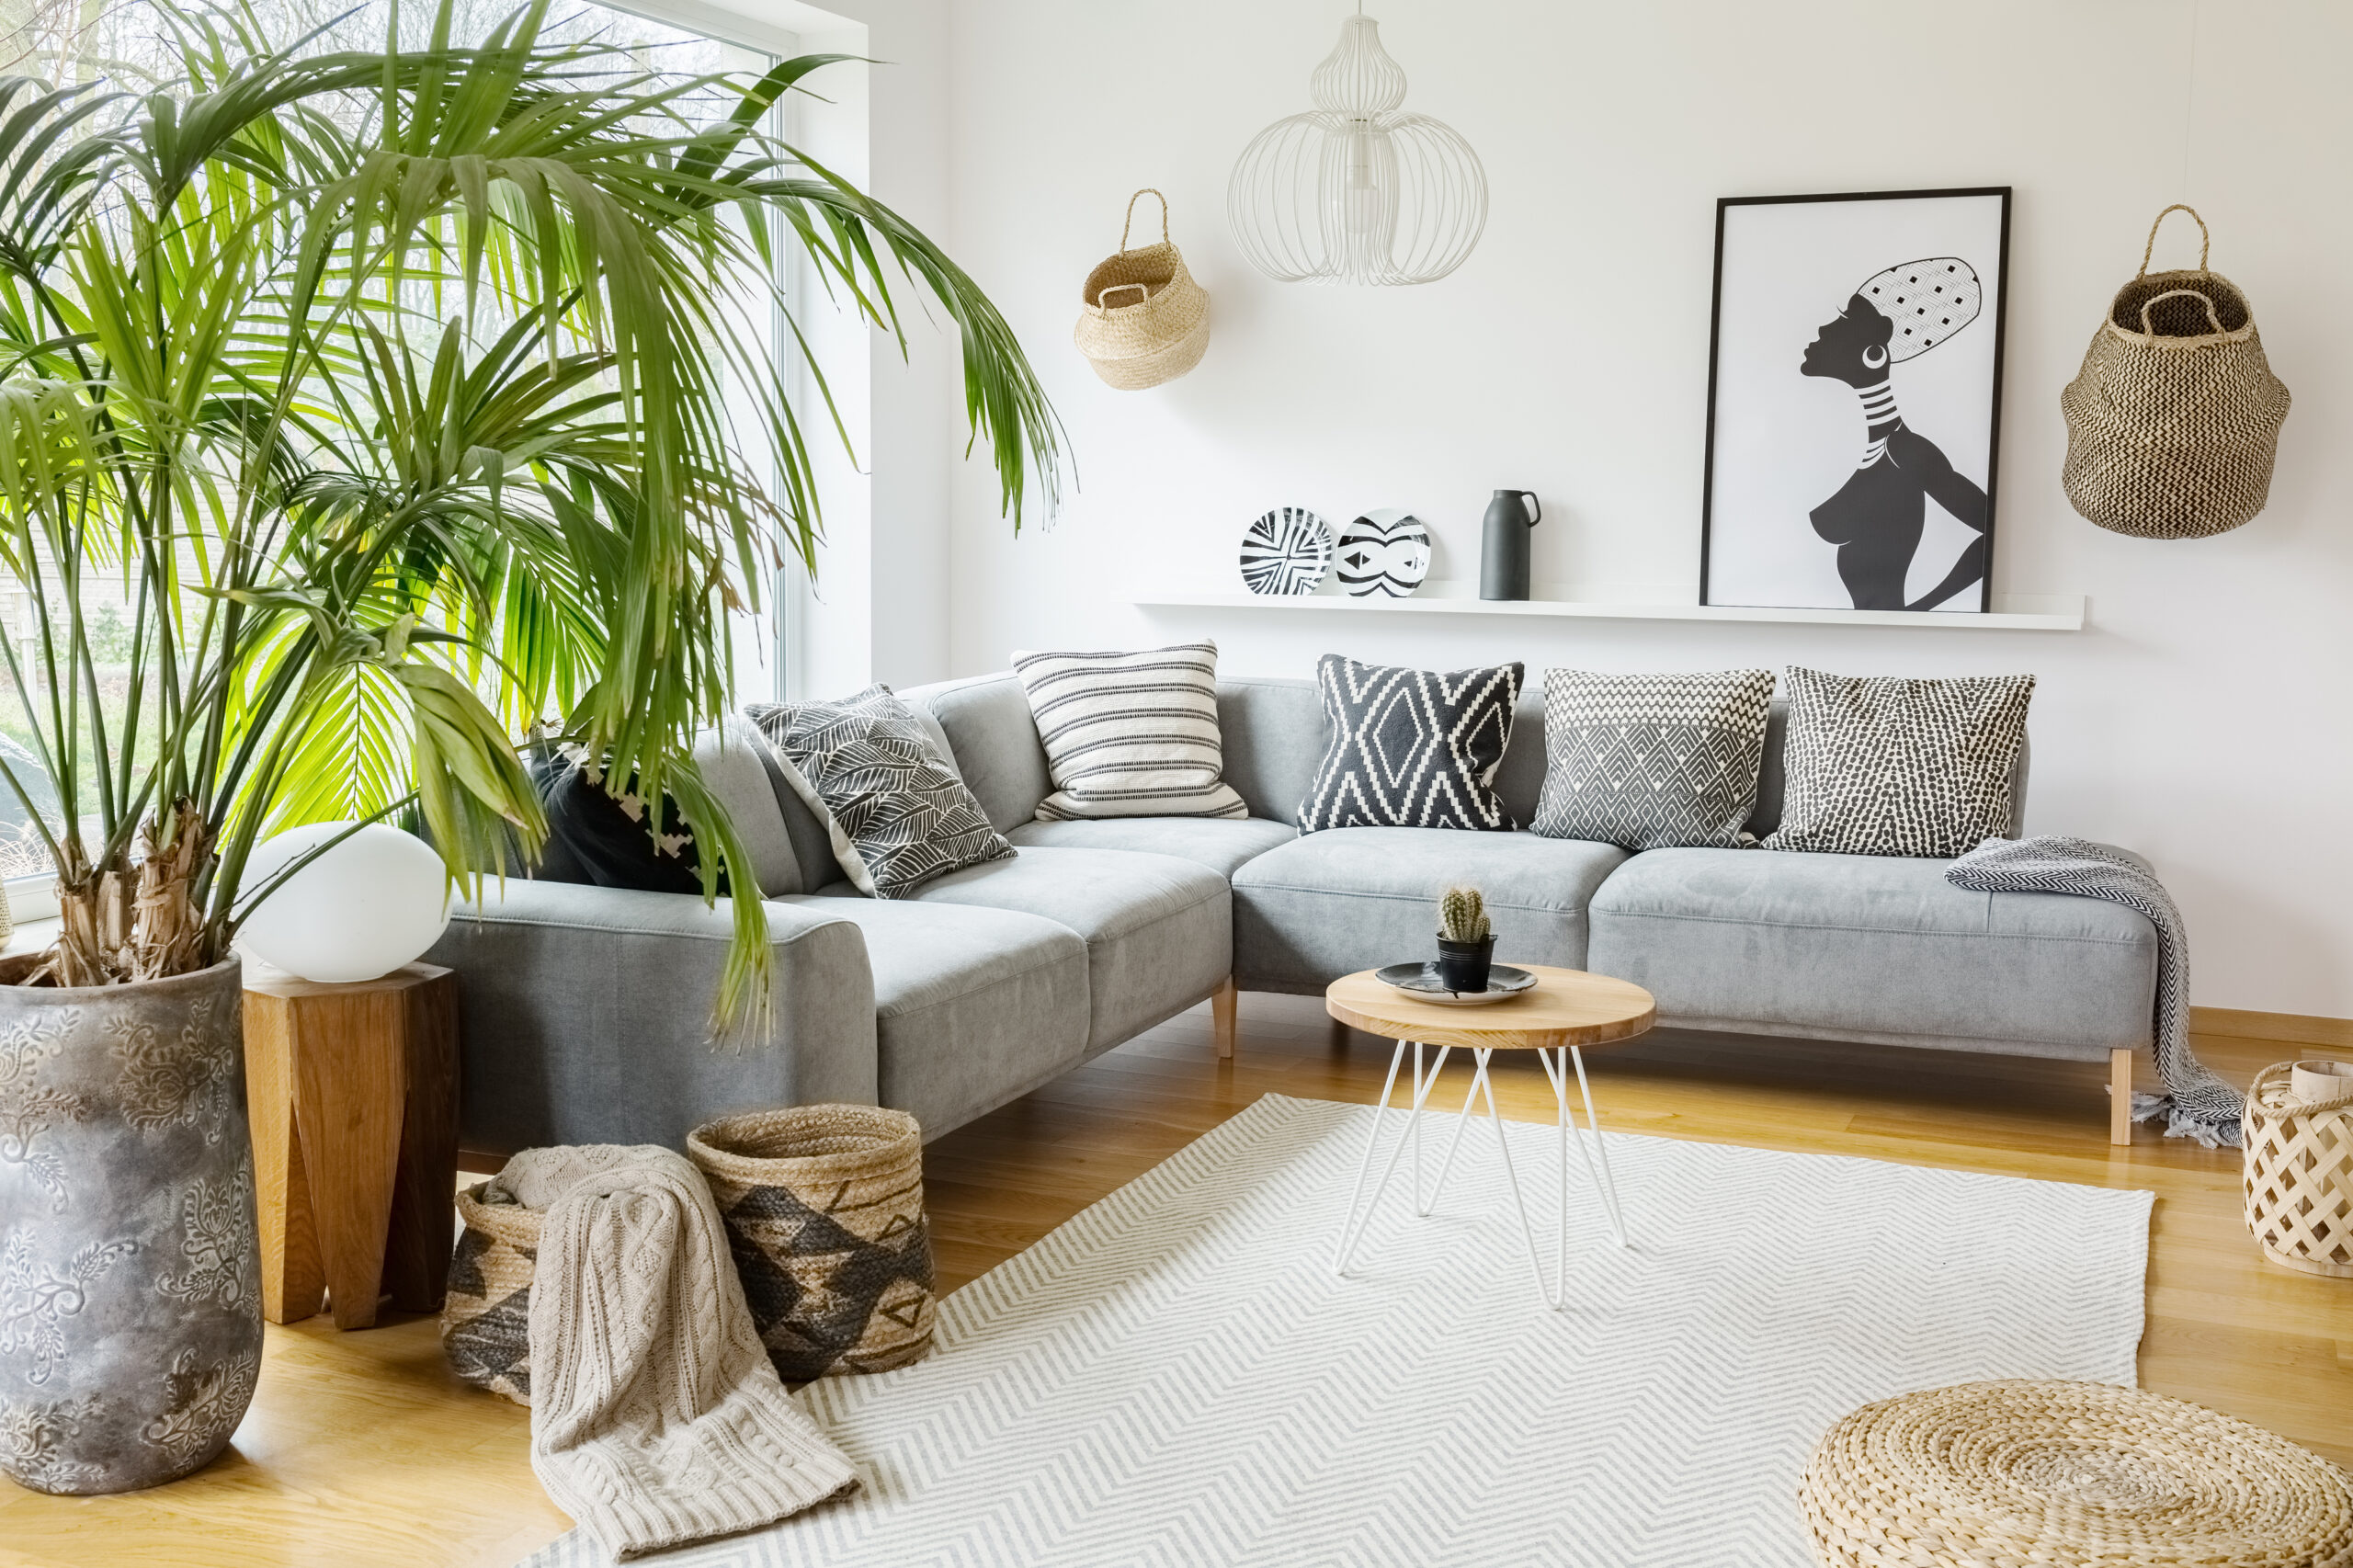 10 Life-Changing Rental Apartment Living Room Decorating Ideas